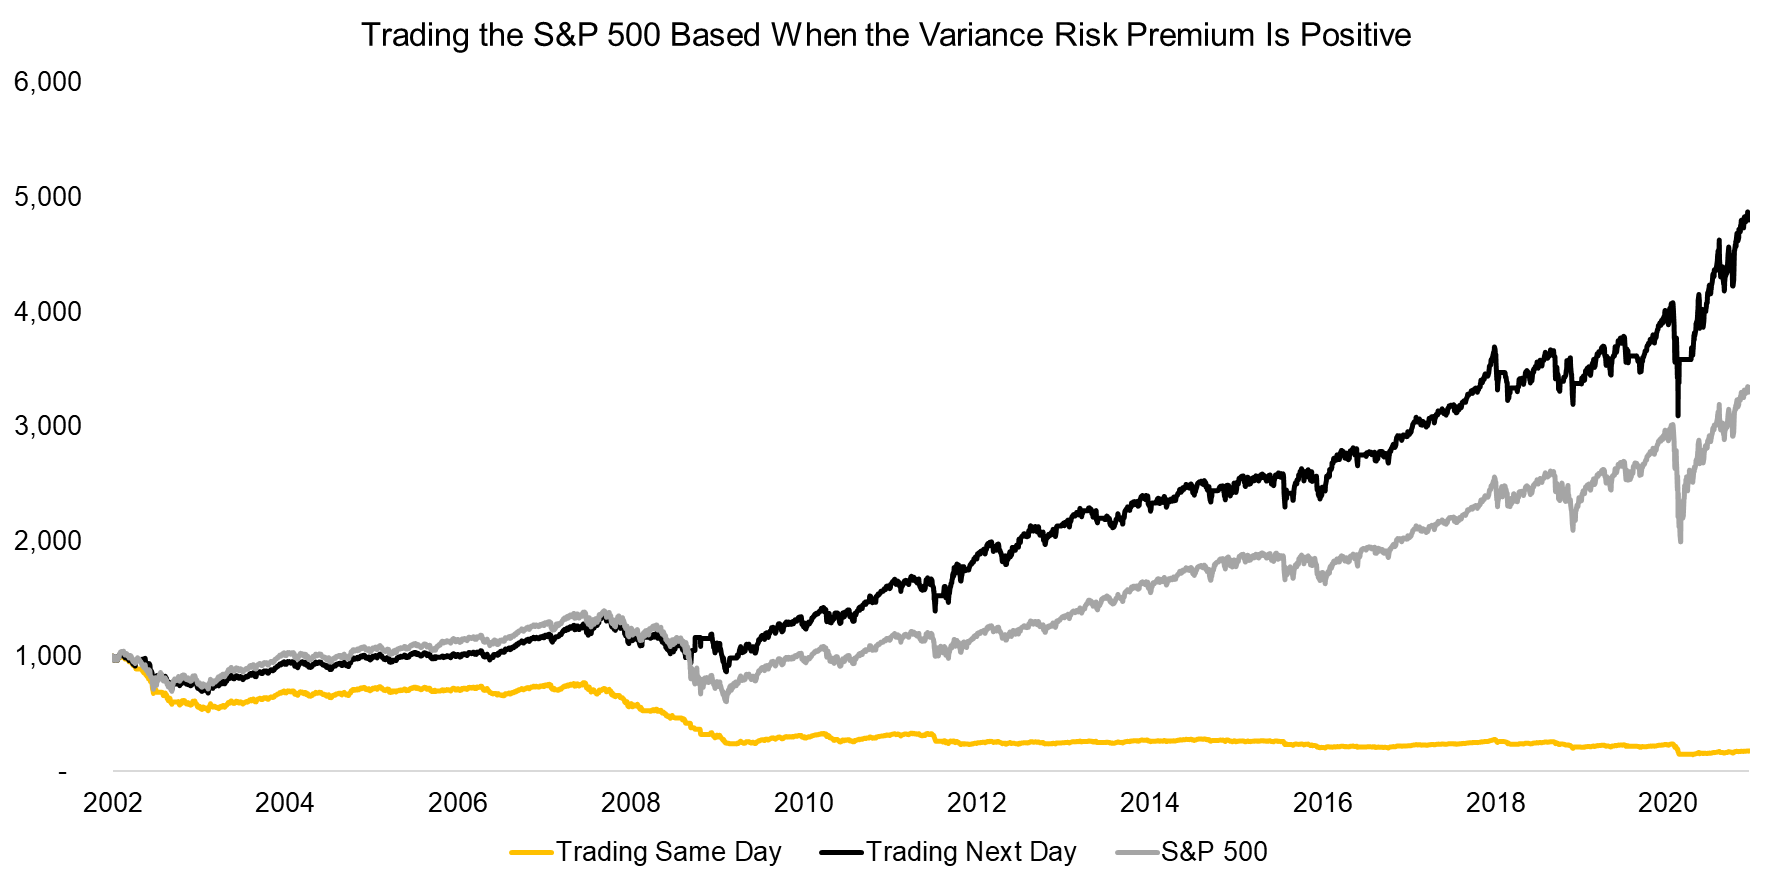 Trading the S&P 500 Based When the Variance Risk Premium Is Positive